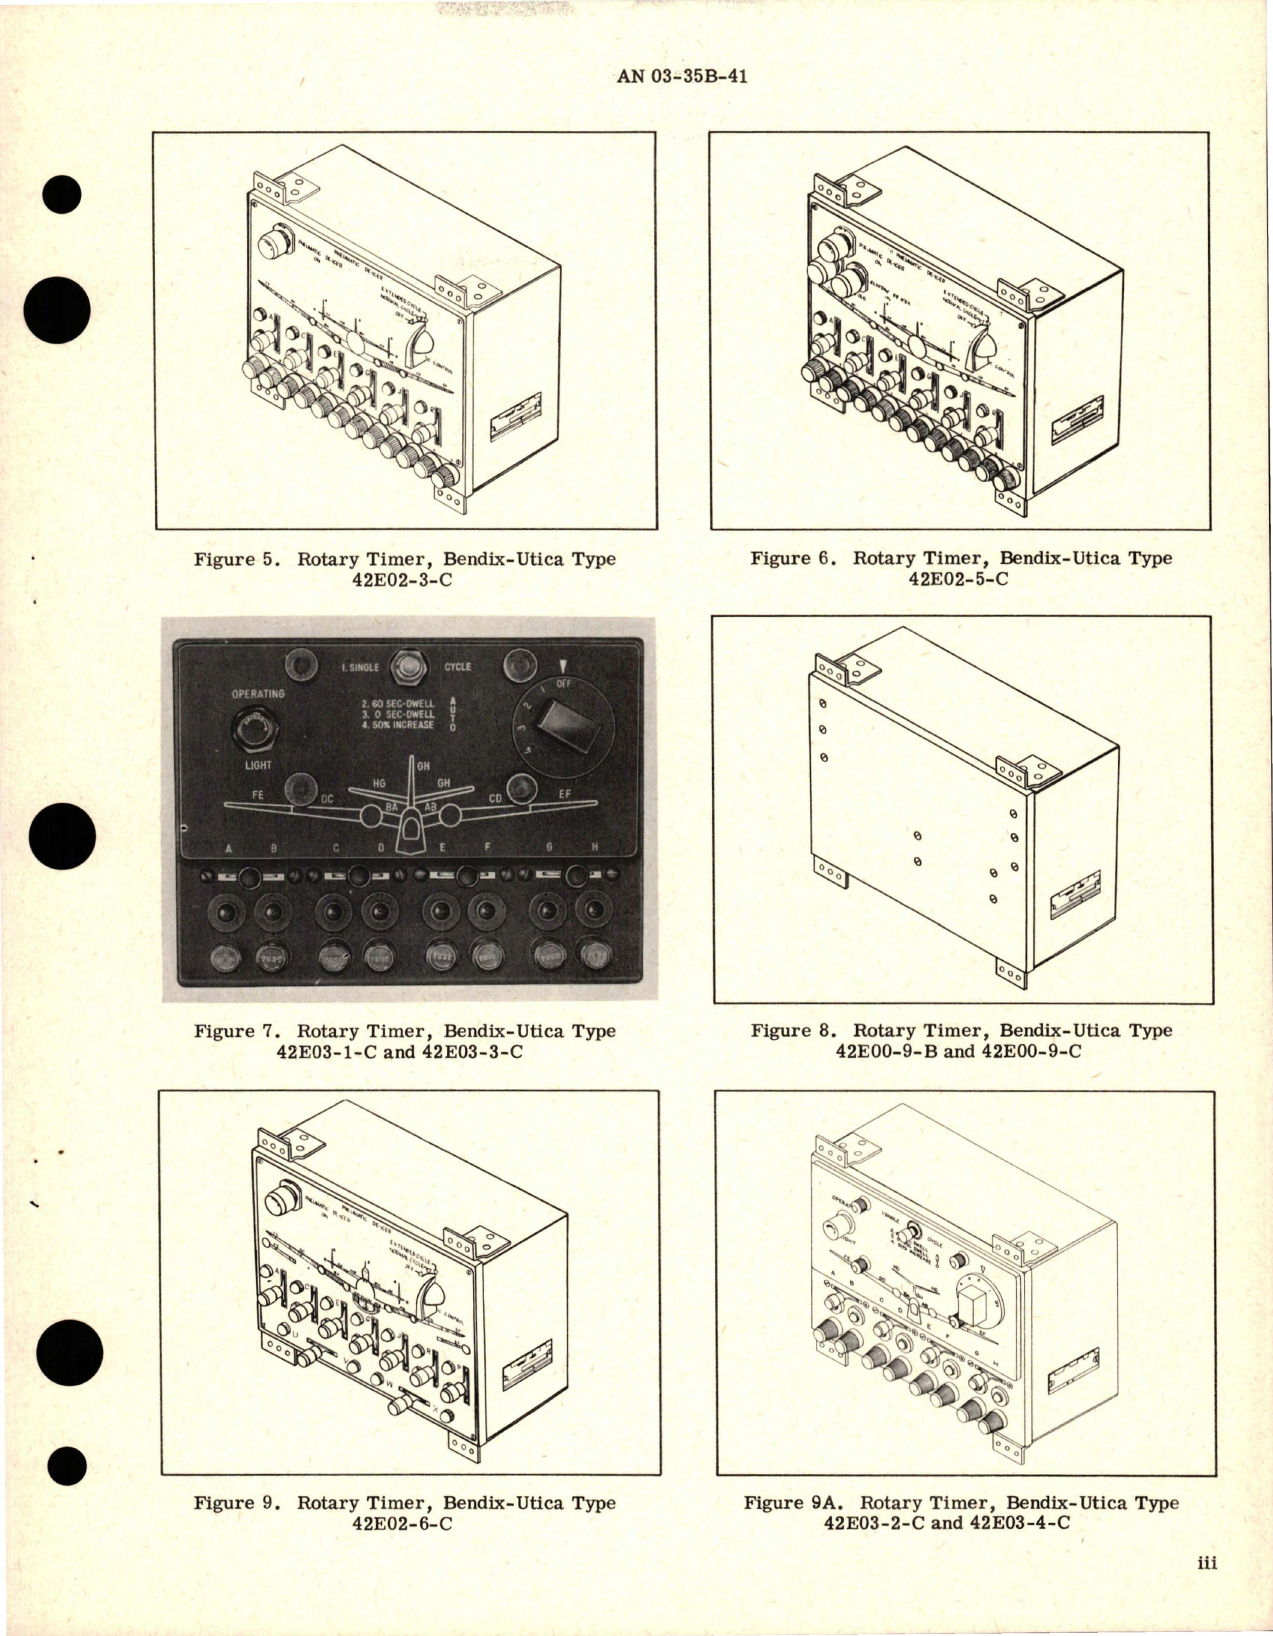 Sample page 5 from AirCorps Library document: Illustrated Parts Breakdown for Rotary Timers